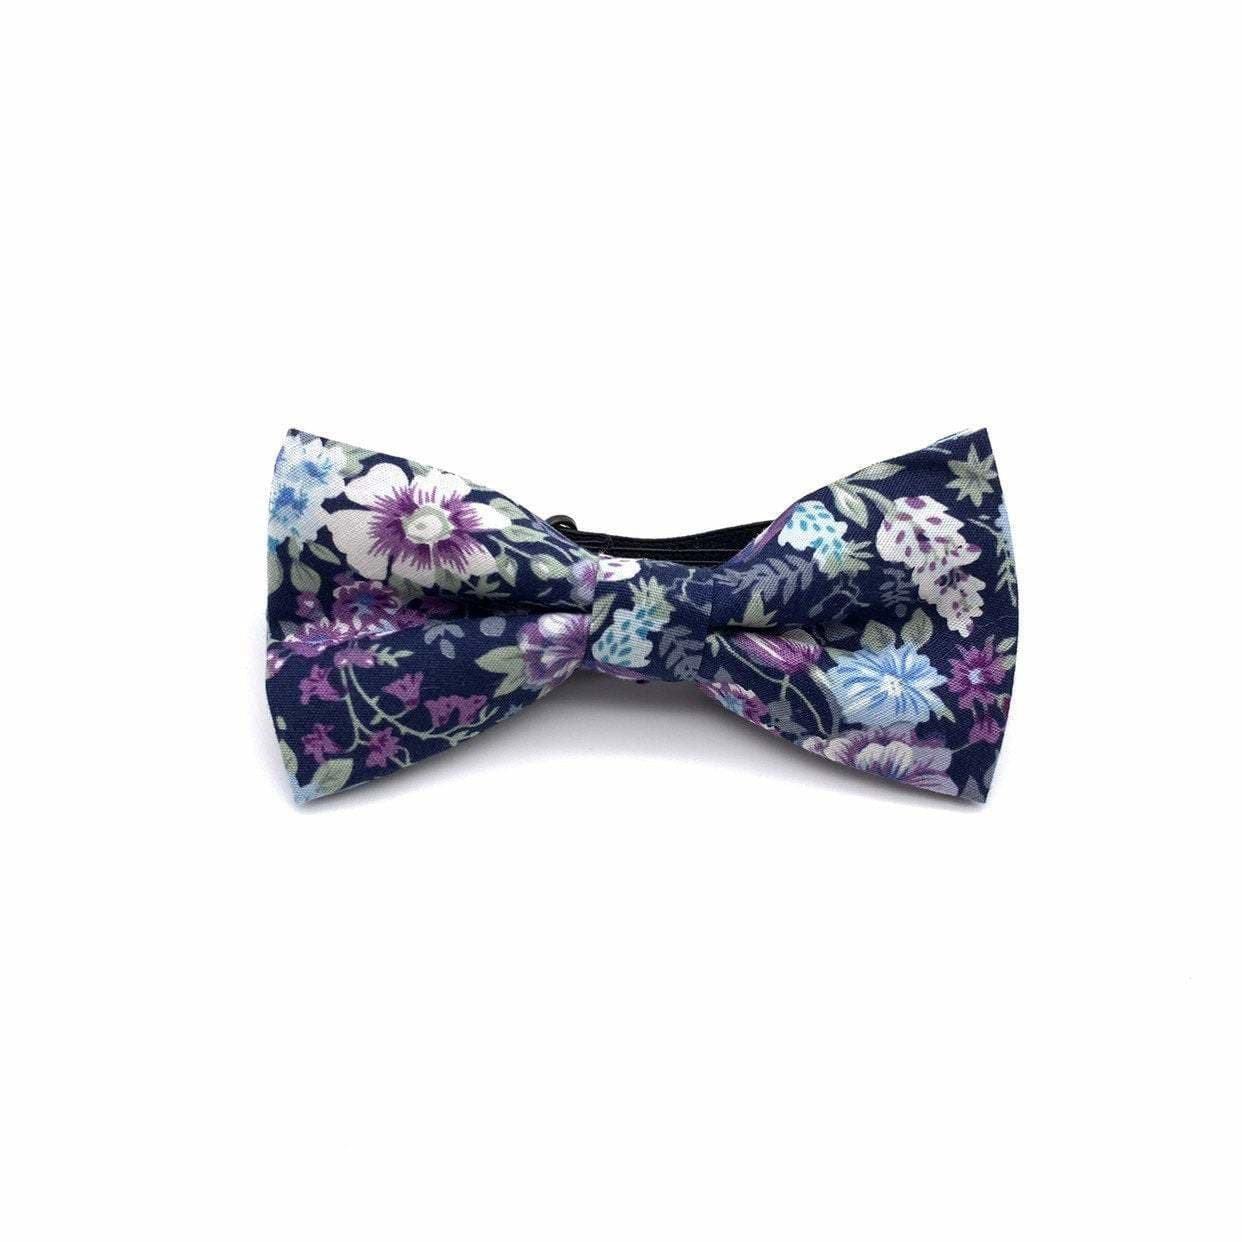 Purple and Blue Kids Floral Pre-Tied Bow Tie Mytieshop - SWEET PEA-Kids&#39; Floral Bow tie SWEET PEA Color: Blue Base Strap is adjustablePre-Tied bowtieBow Tie 10.5 * 6CM Great for Prom Dinners Interviews Photo shoots Photo sessions Dates Wedding Attendant Ring Bearers Fits toddlers and babies. Evabder baby ow tie toddler bow tie floral for wedding and events groom groomsmen flower bow tie mytieshop ring bearer page boy bow tie white bow tie white and blue tie kids bowtie floral Adjustable wedding 